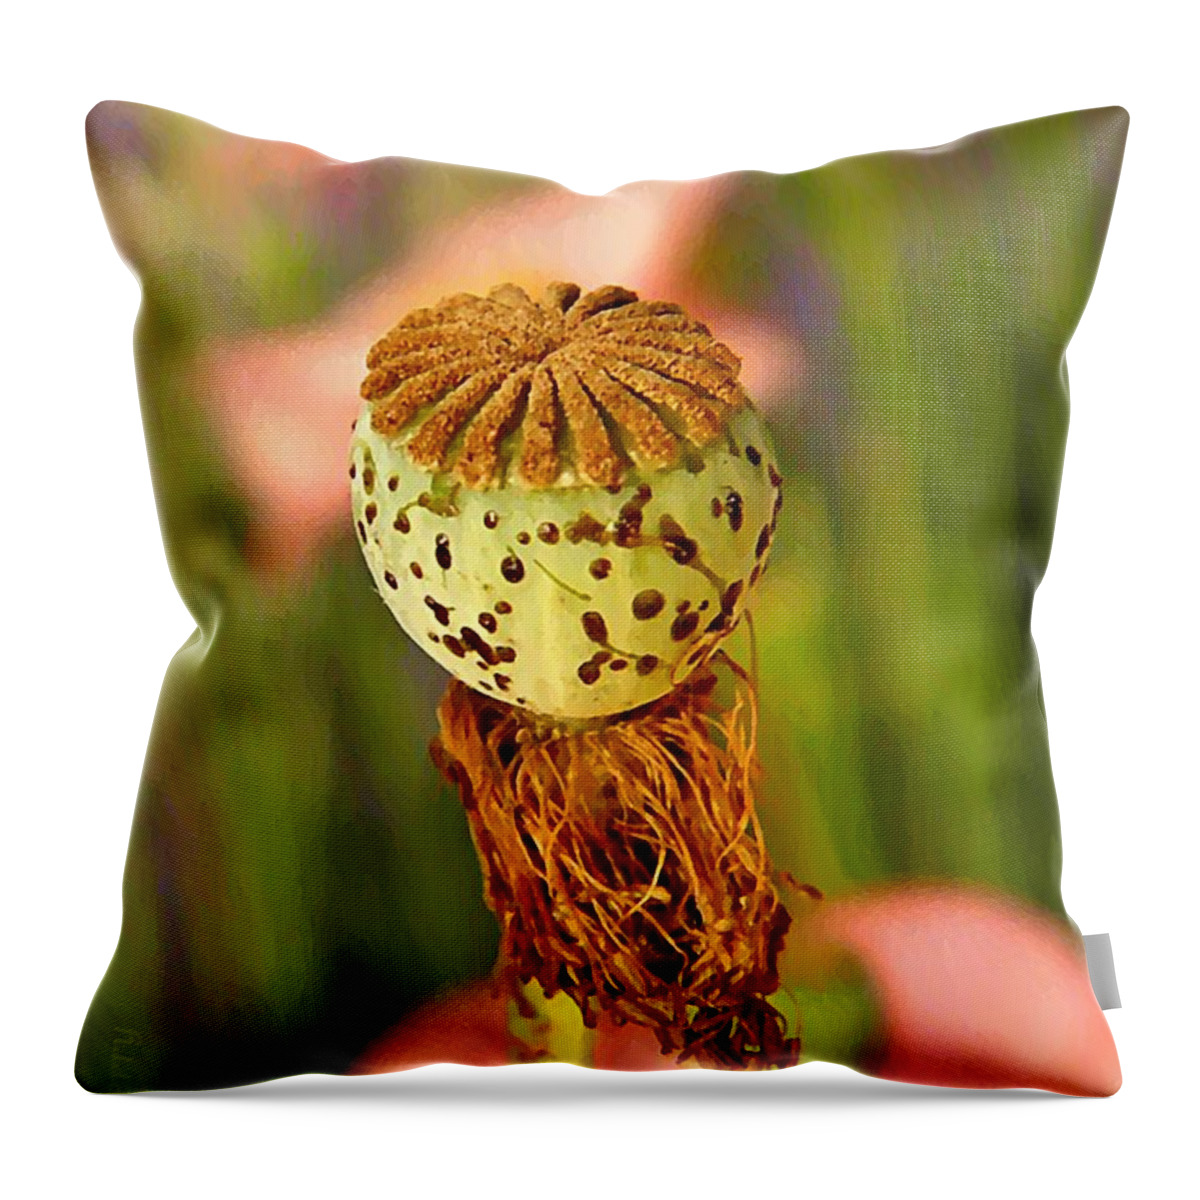  Throw Pillow featuring the photograph A New Purpose by Chris Berry